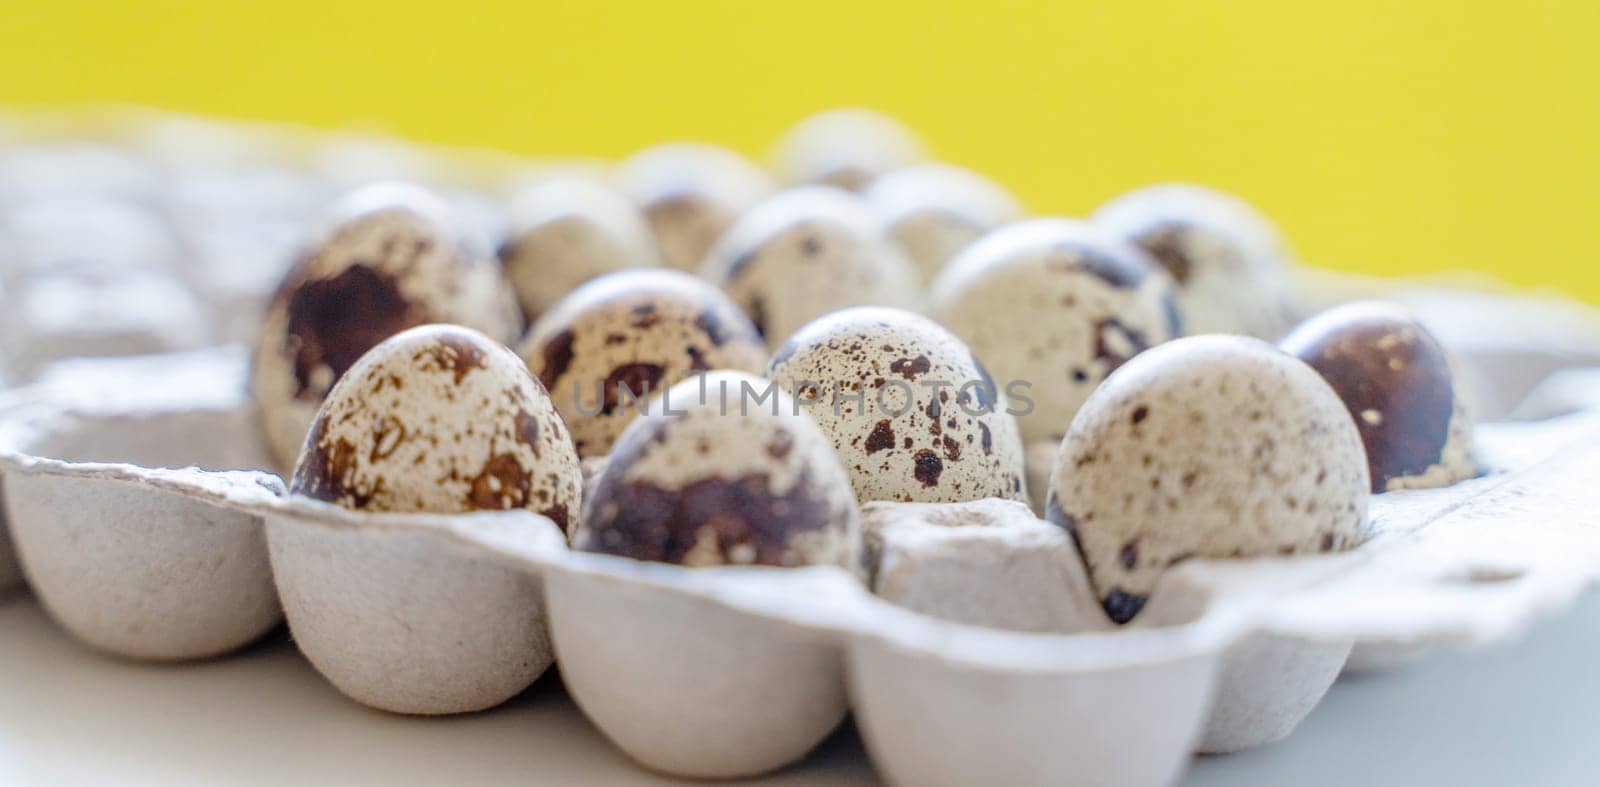 Spotted quail eggs in an egg box on a yellow background, natural eco friendly products. by Matiunina